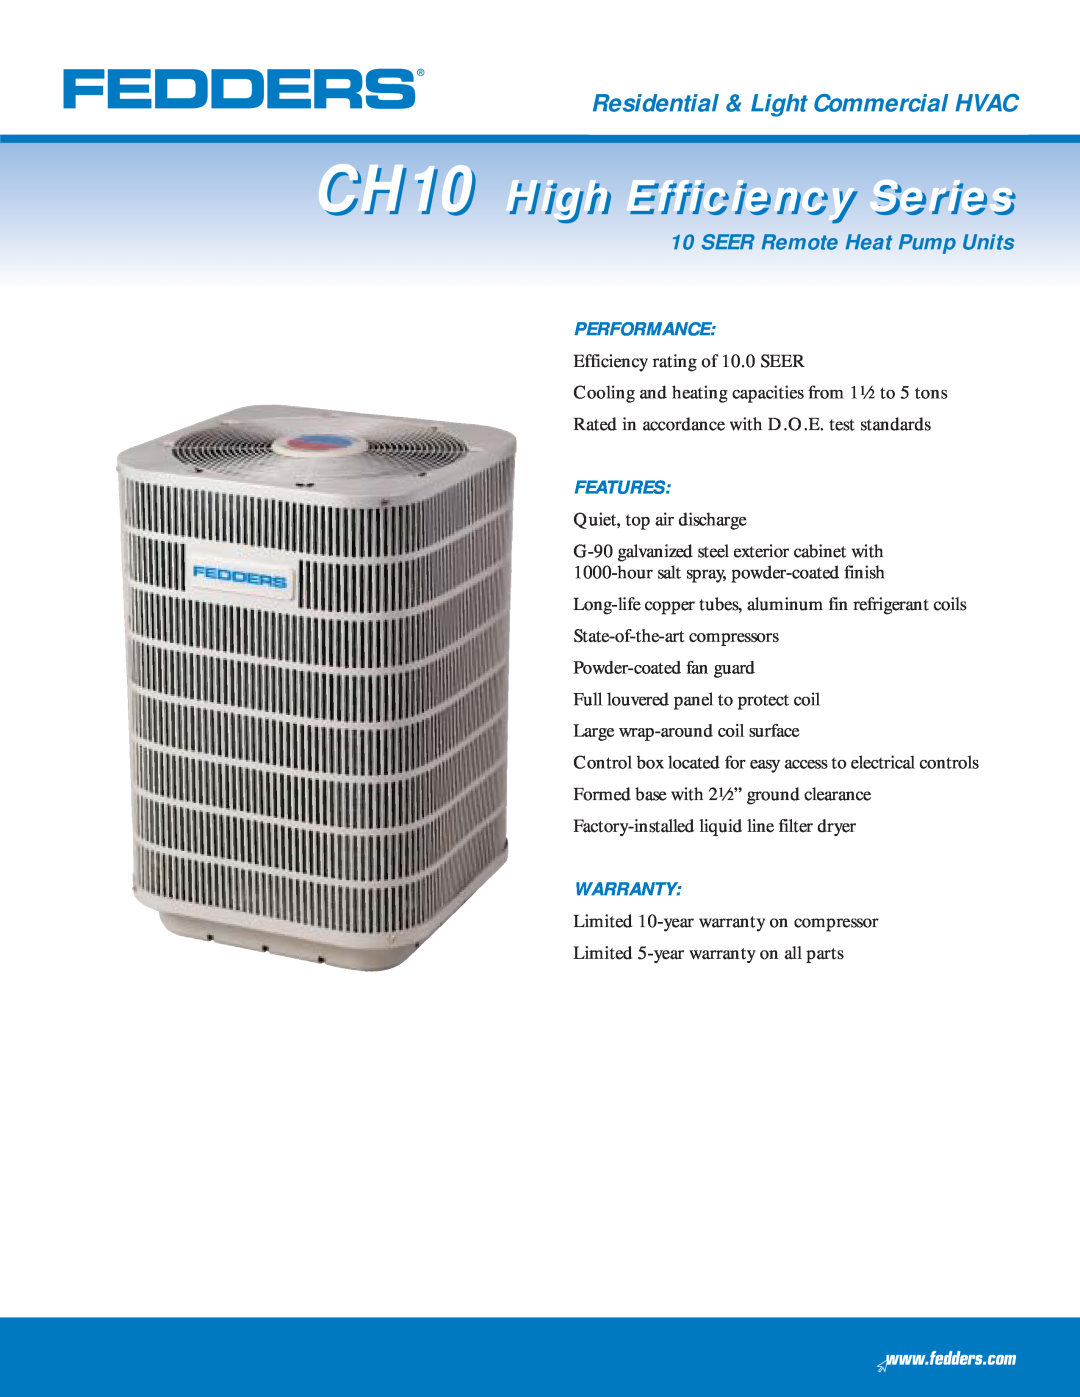 Fedders CH1060CBD4VF warranty CH10 High Efficiency Series, Residential & Light Commercial HVAC, Performance, Features 